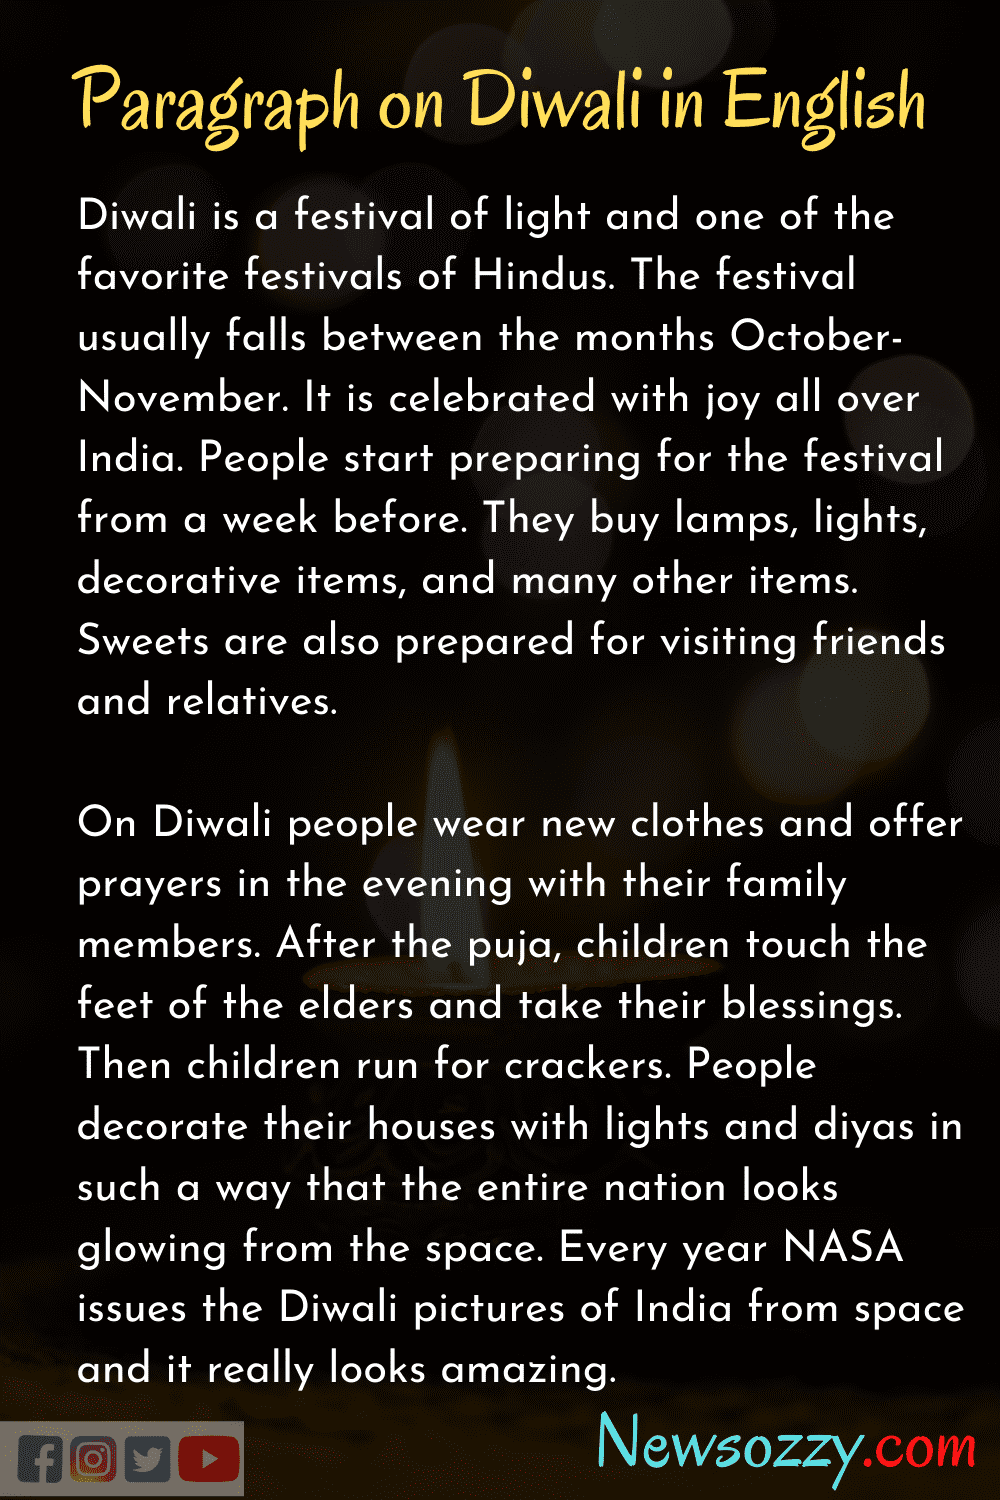 diwali essay with picture